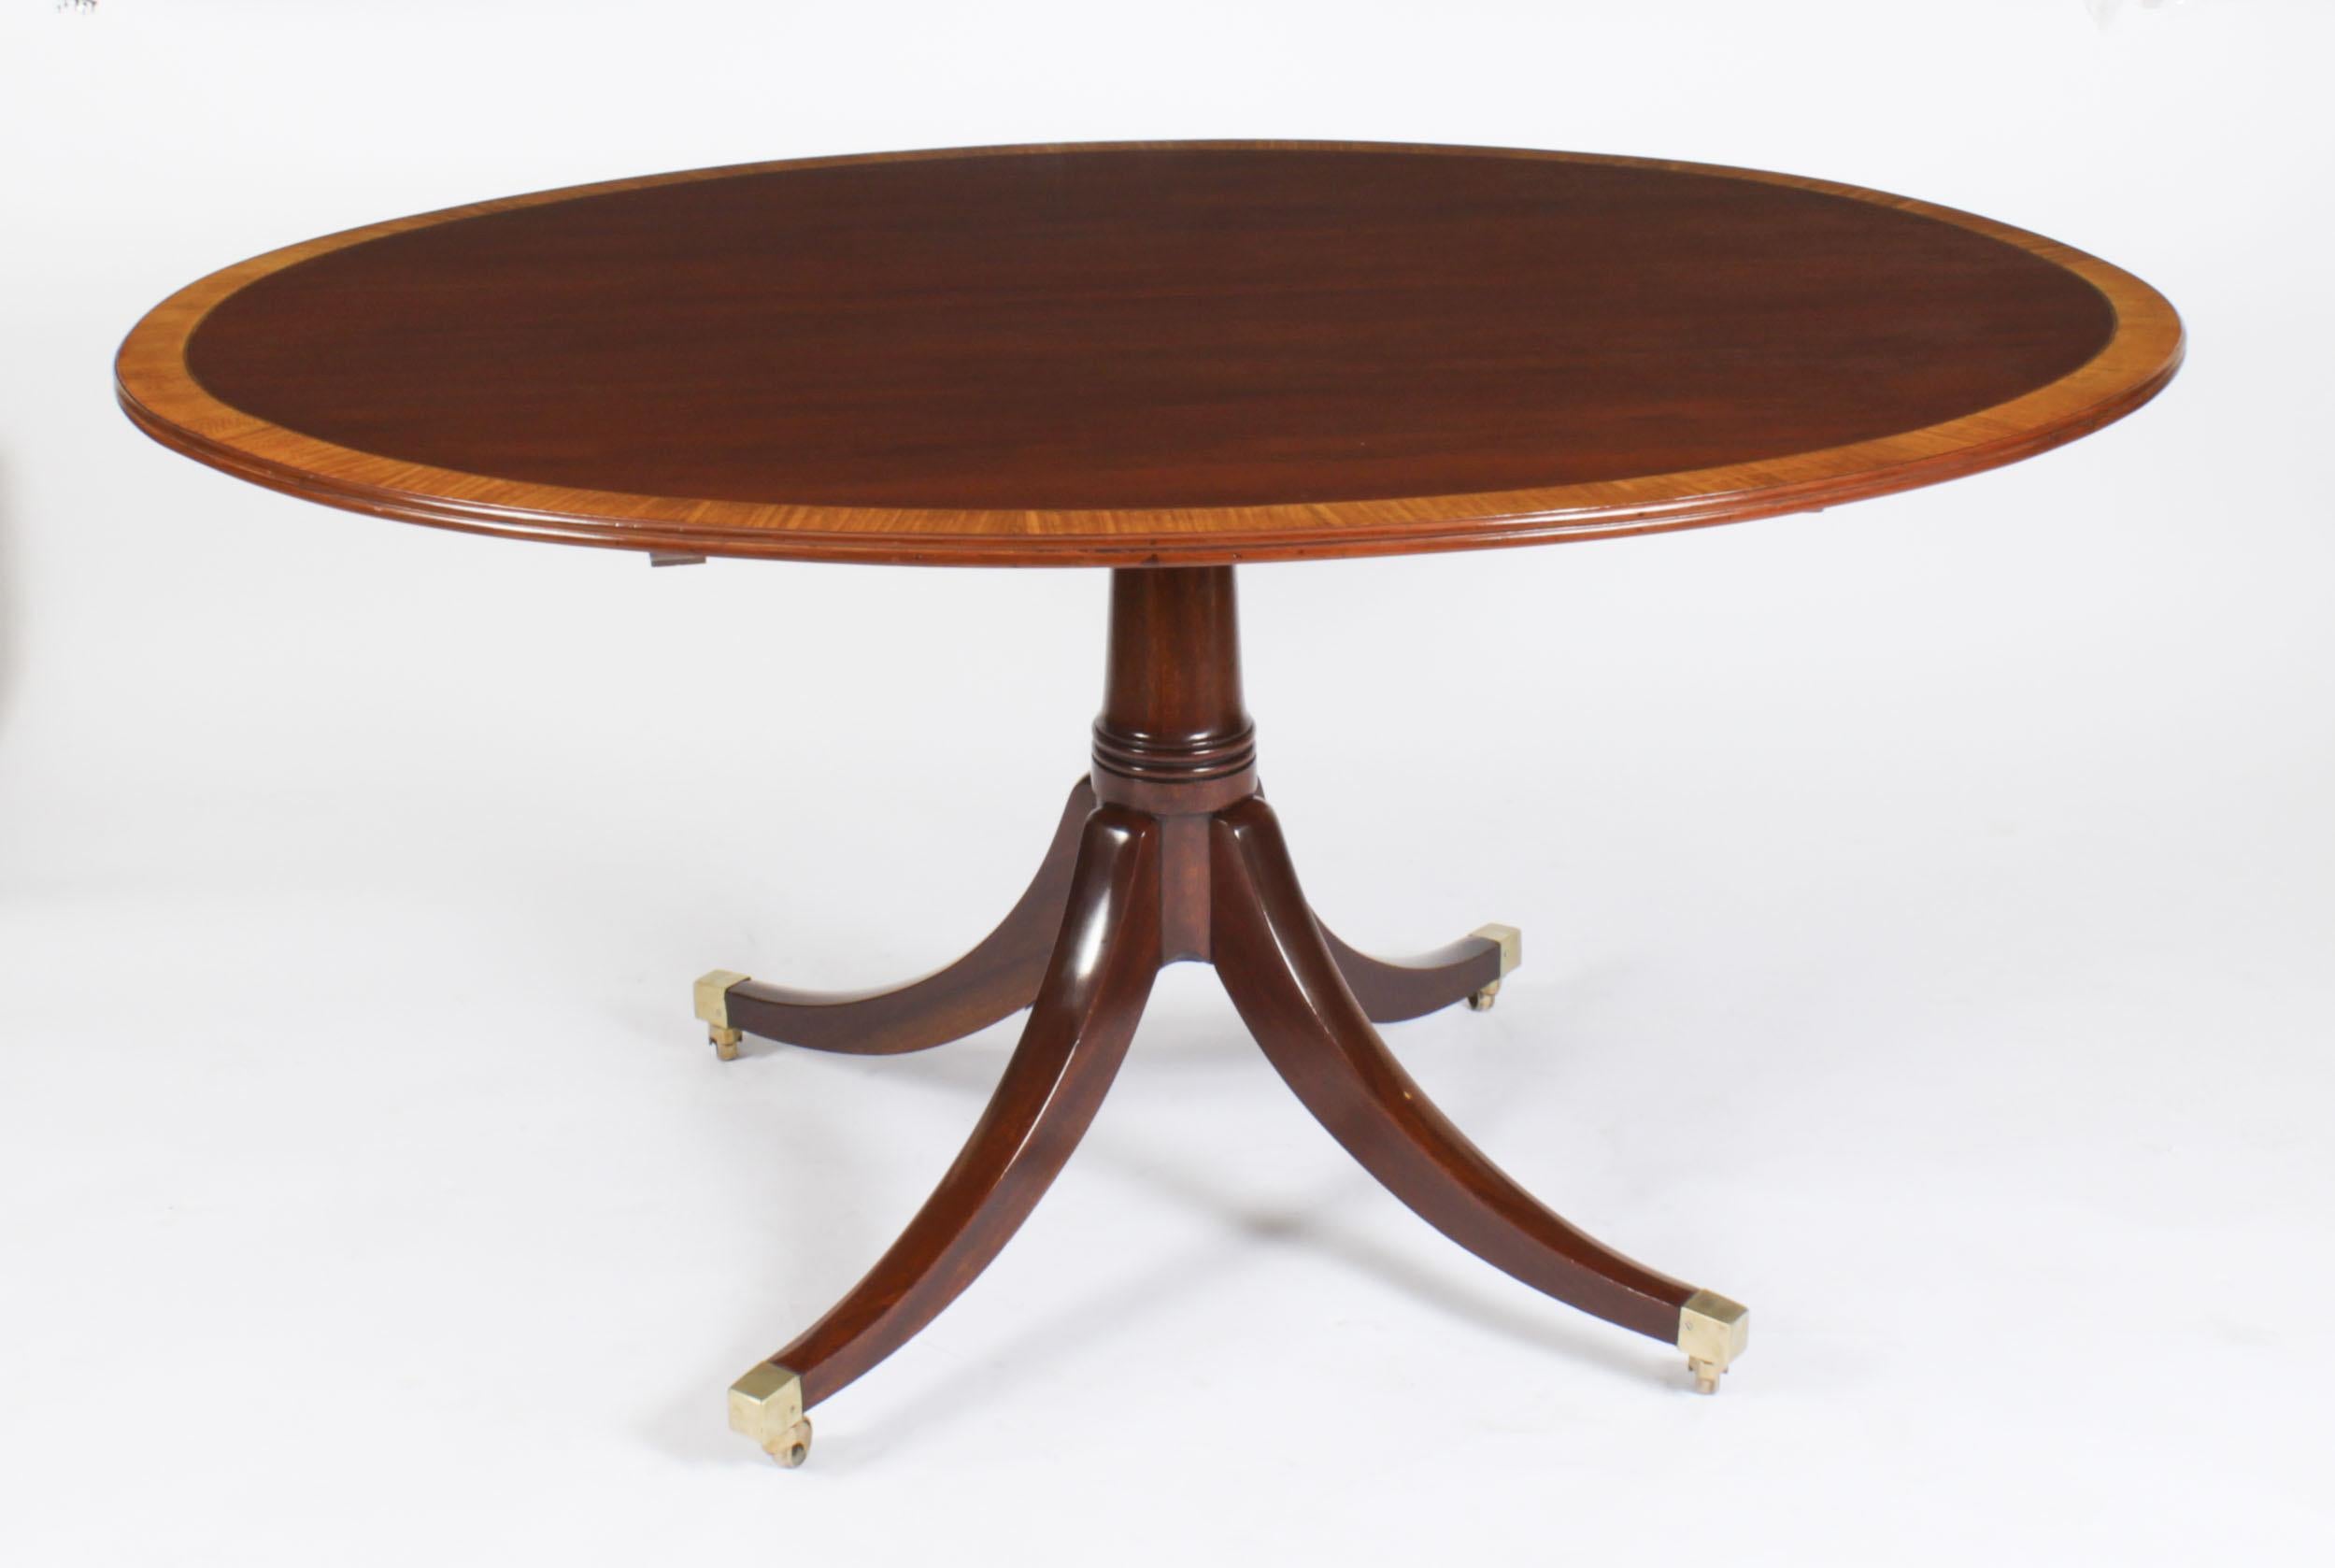 Mahogany Antique Oval Tilt Top Dining Table Early 20th Century & 6 Chairs